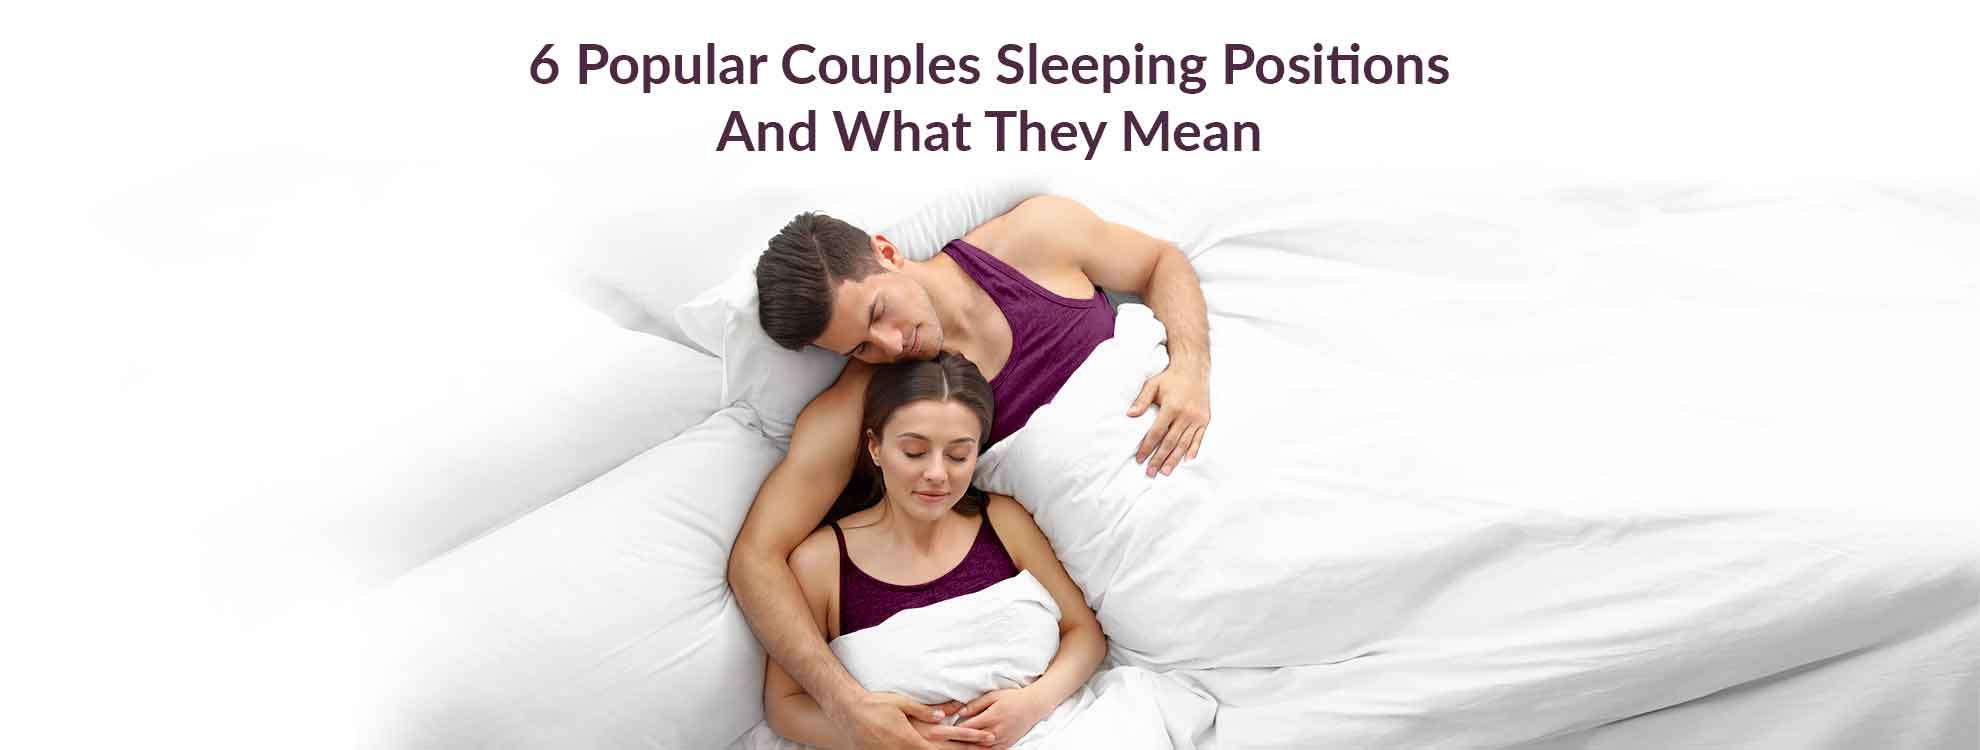 https://cdn.shopify.com/s/files/1/1714/5961/files/6_Popular_Couples_Sleeping_Positions_And_What_They_Mean.jpg?v=1695965960